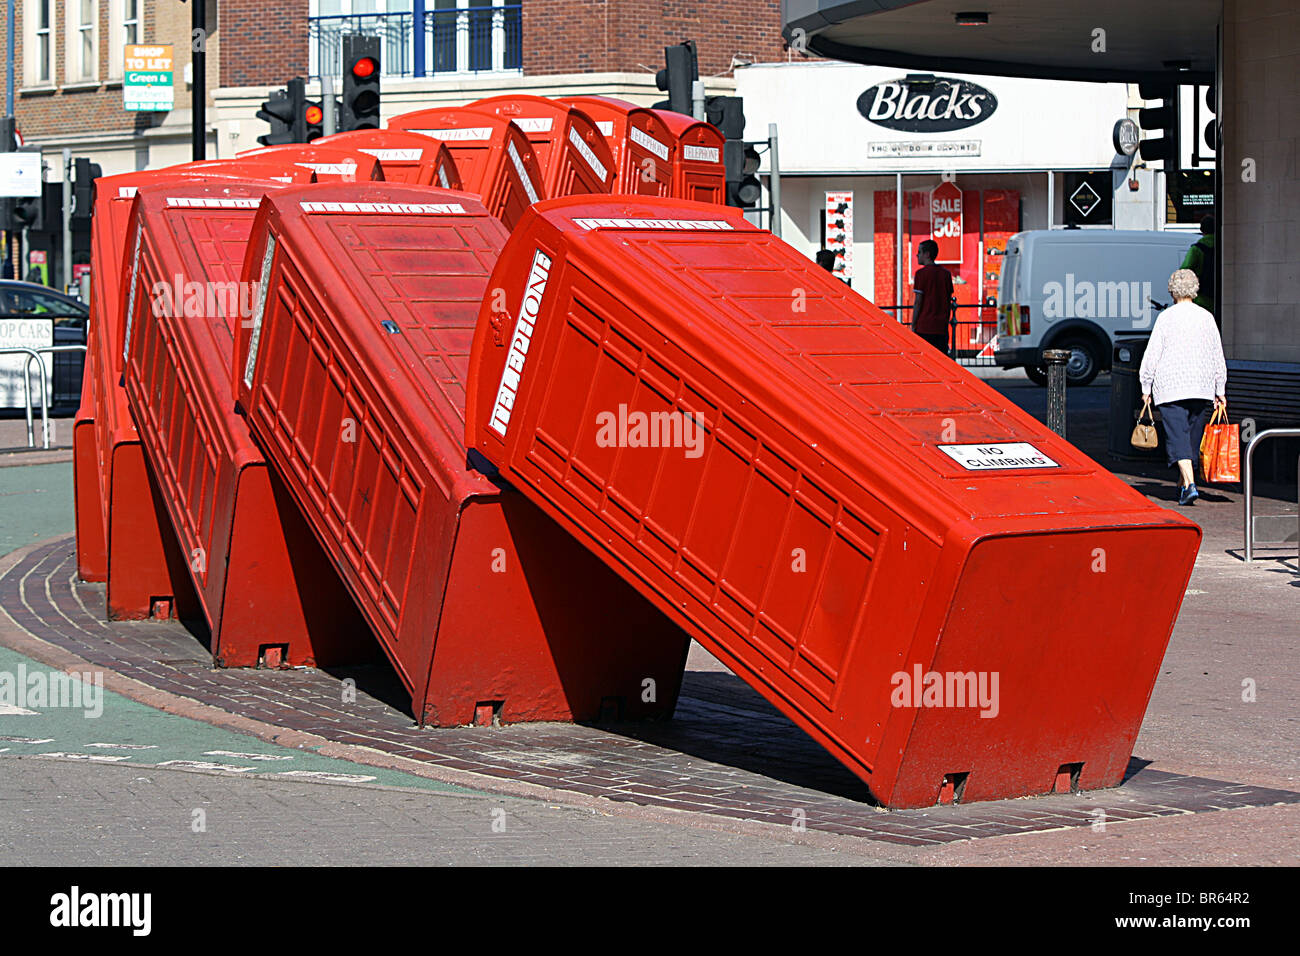 Sculpture, Out of Order, Kingston, London Stock Photo